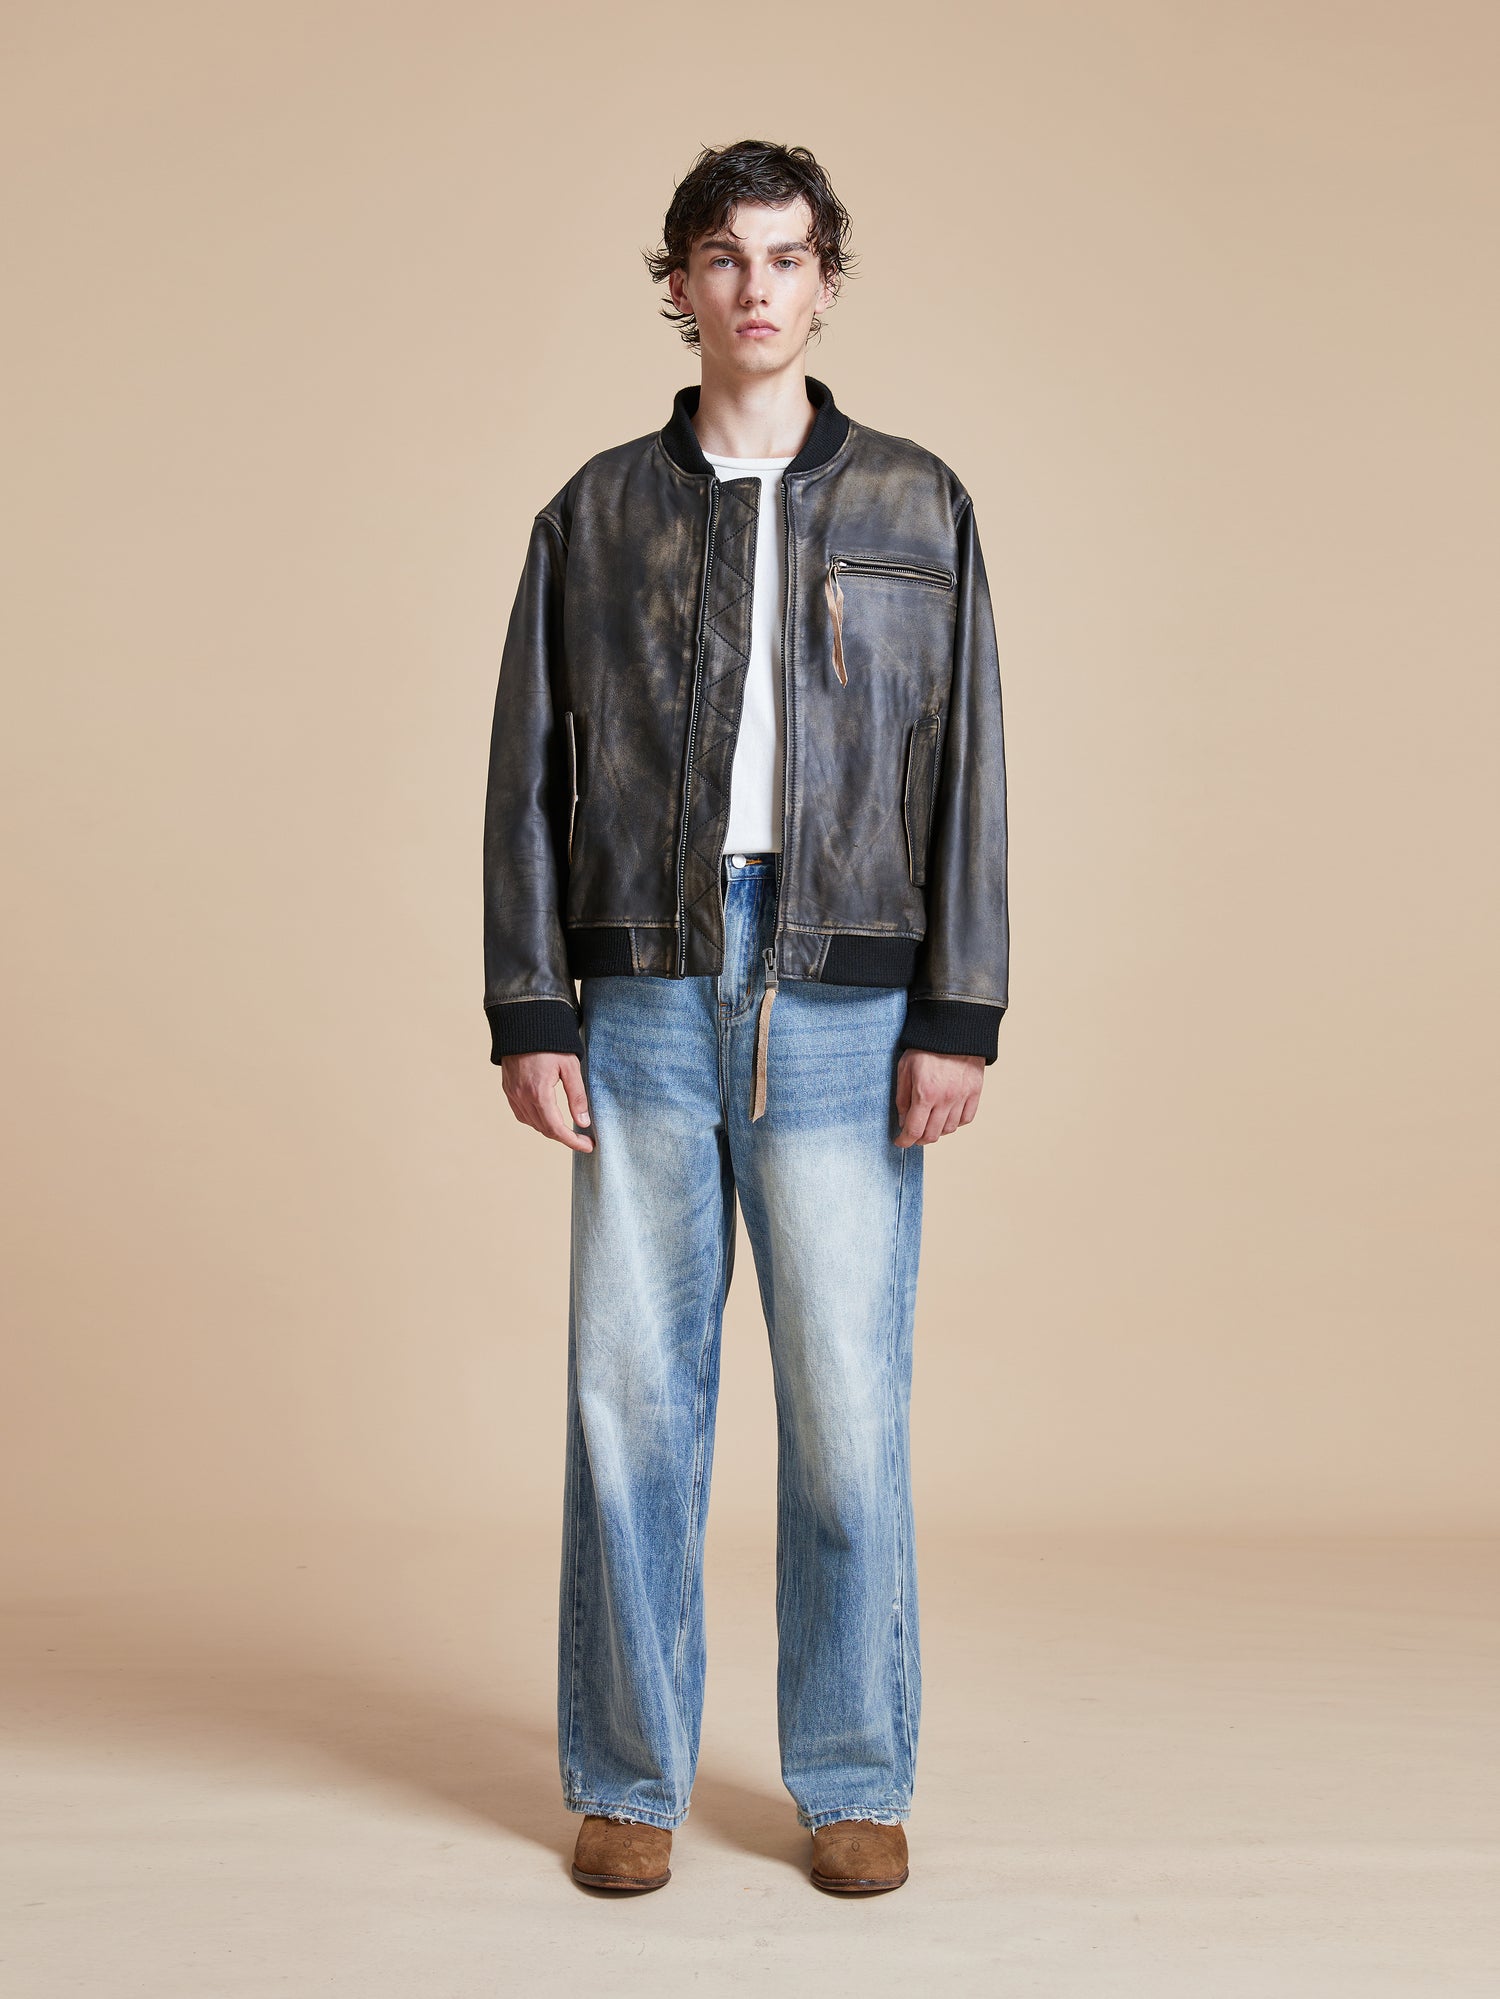 A man wearing jeans and a Found Distressed Pavement Leather Bomber Jacket.